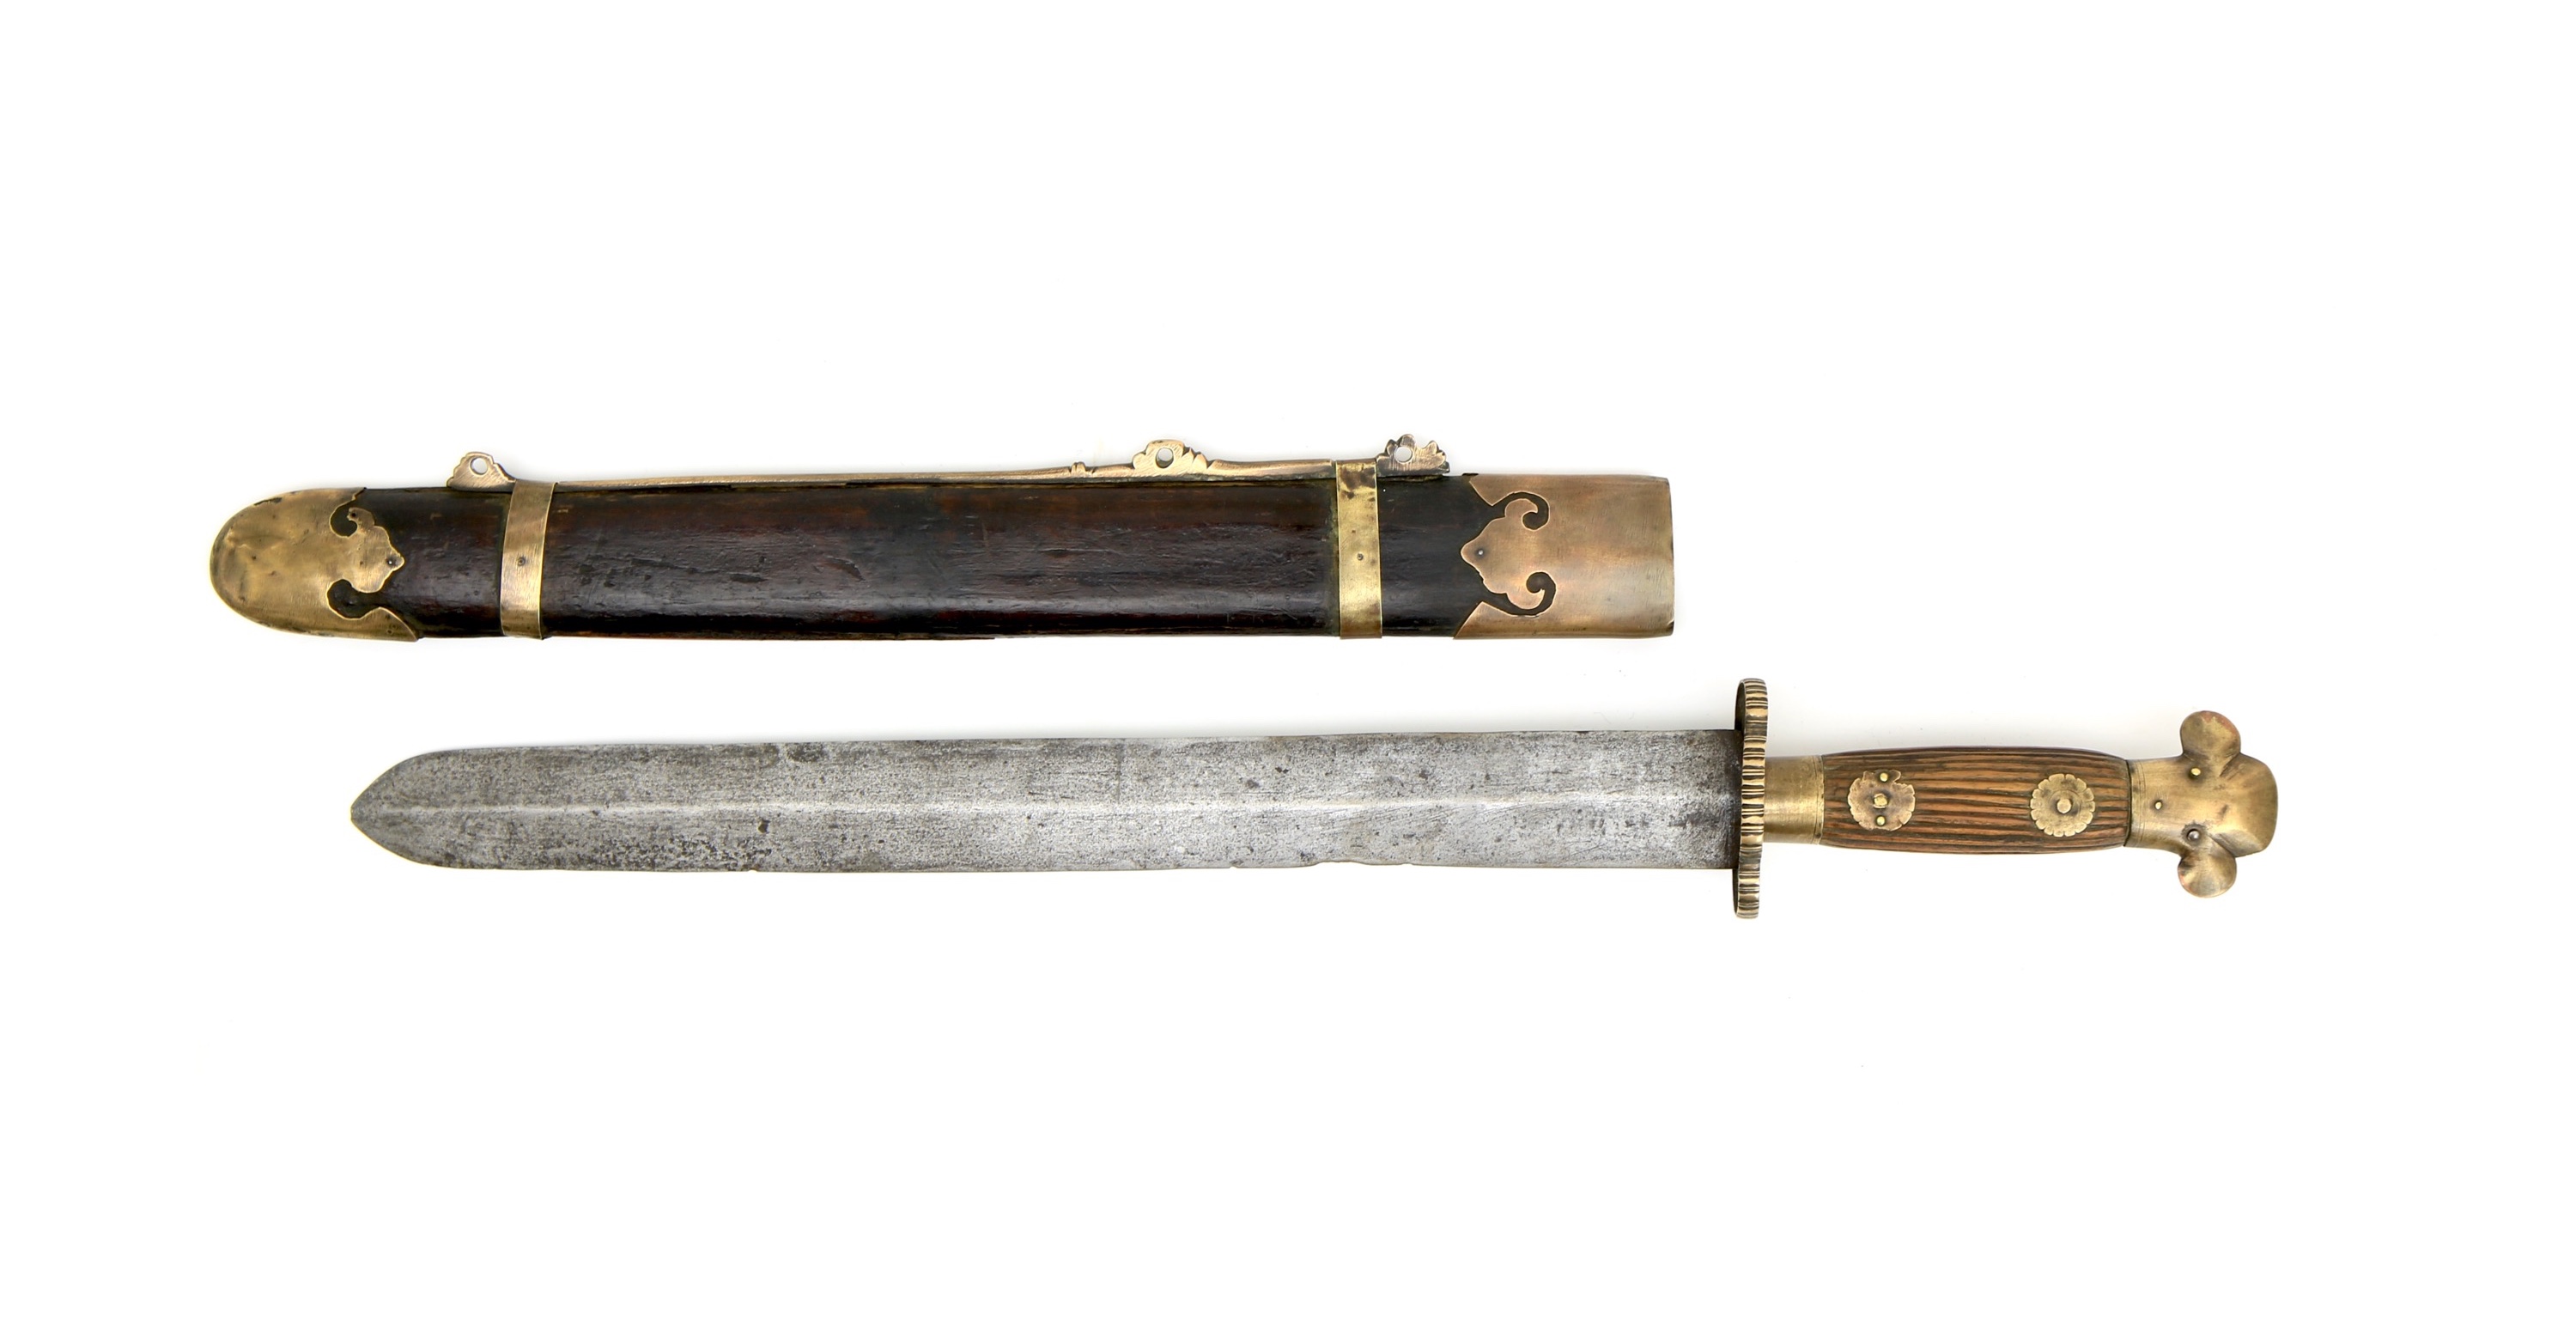 A Chinese executioners sword